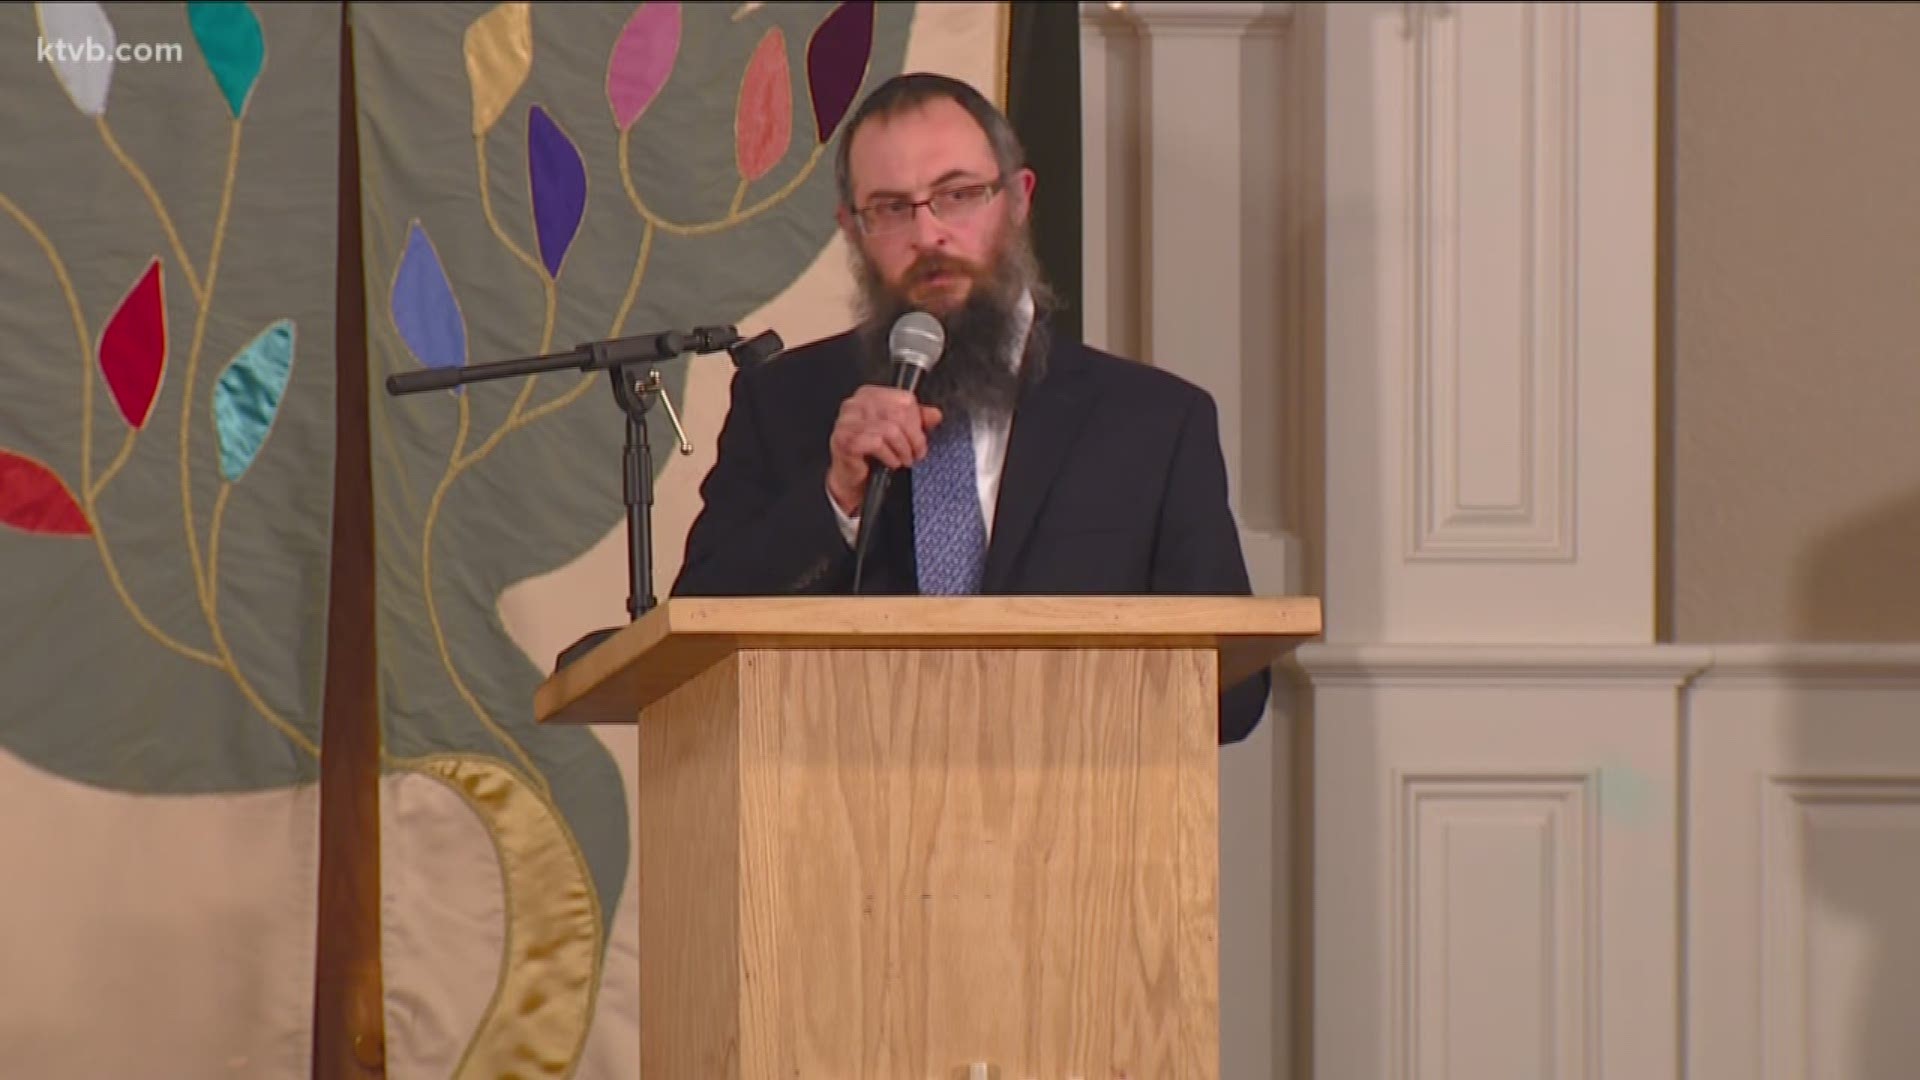 The rabbi preached a message of kindness and love in the wake of the attack.